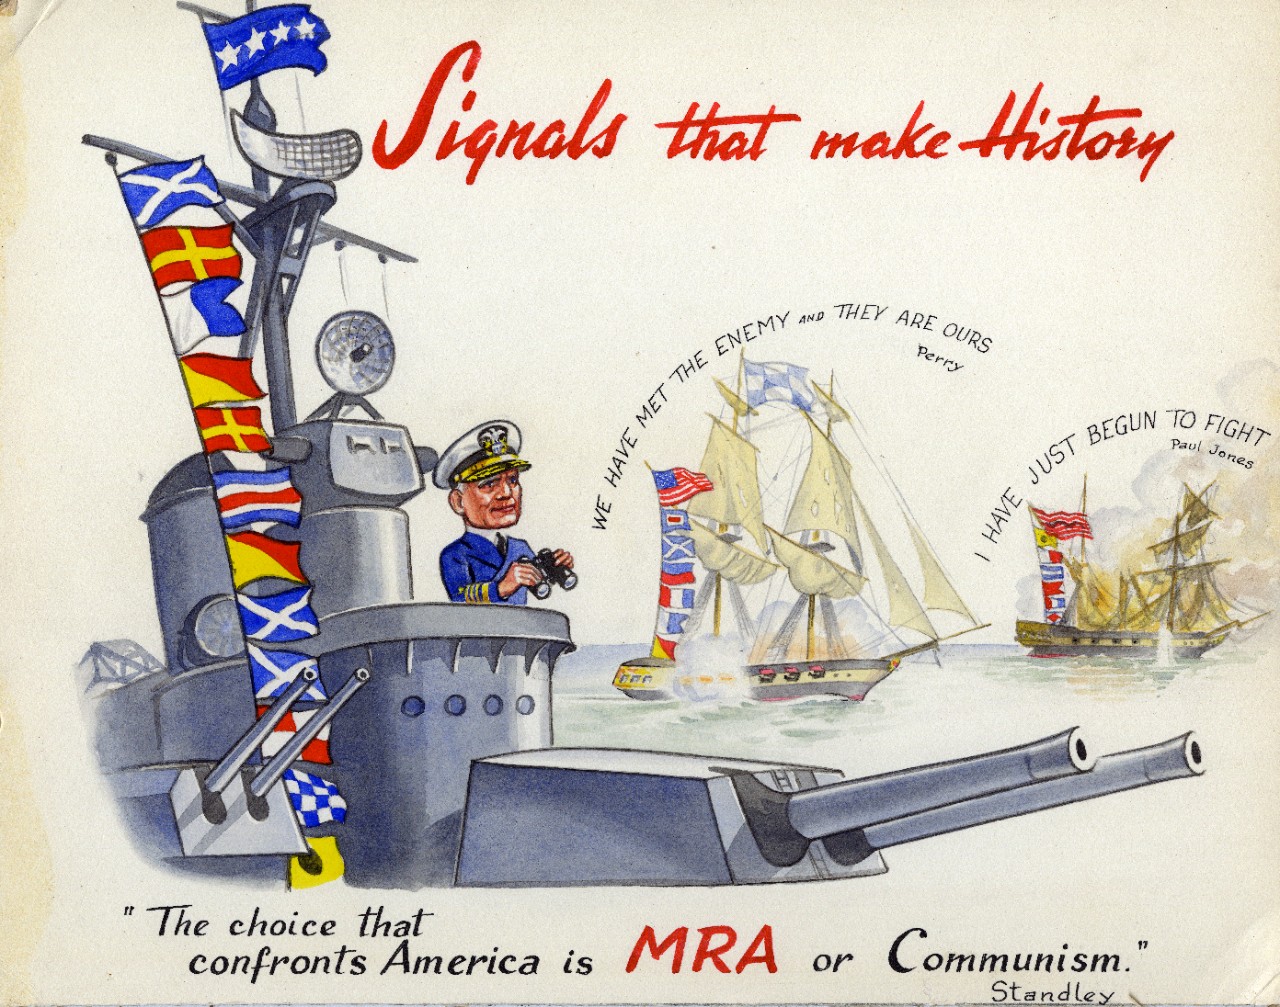 Artwork featuring a quotation from retired Admiral William H. Standley in support of the Moral Re-Armament (MRA) cause opposing Communism during the Cold War. The quote reads "The choice that confronts America is MRA or Communism." Also shown are famous naval quotes by Oliver Hazard Perry and John Paul Jones. Artist unknown.